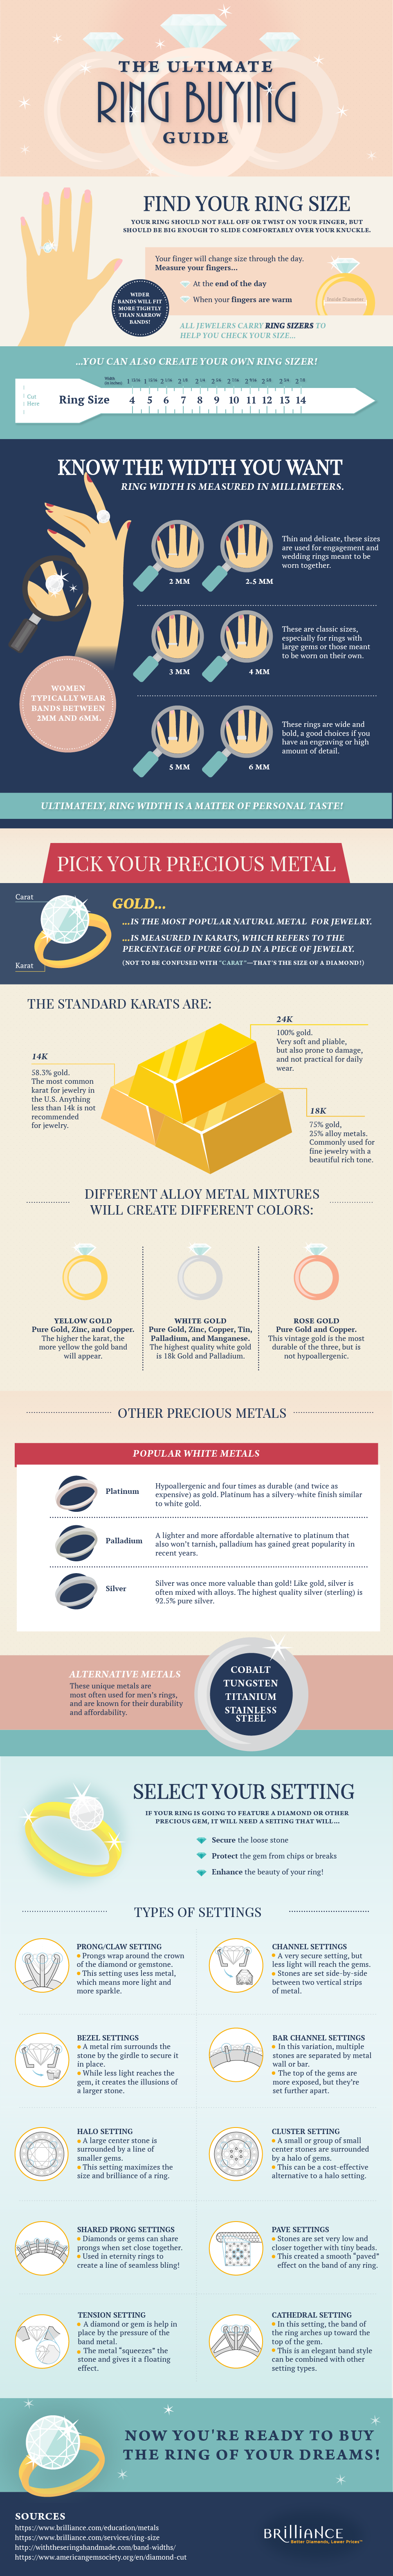 the ultimate ring buying guide infographic